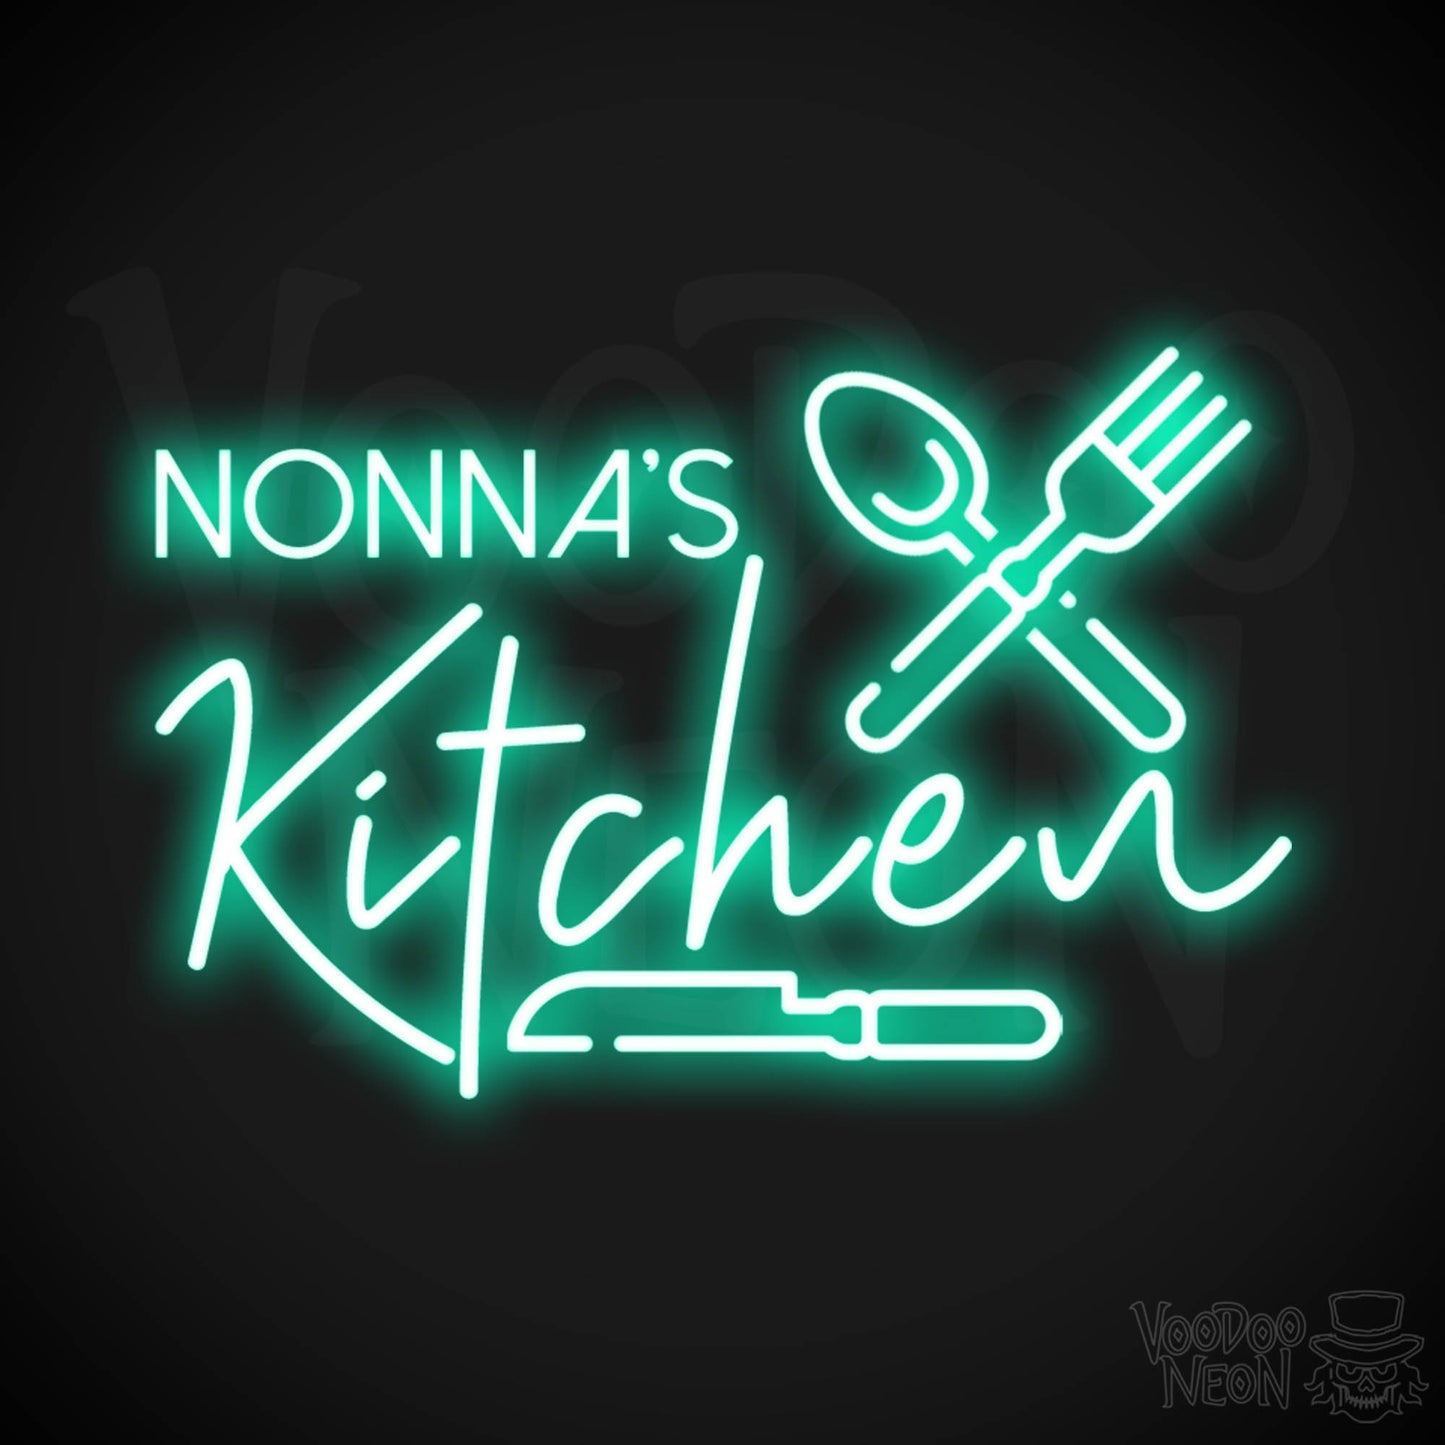 Nonna's Kitchen Neon Sign - Neon Nona's Kitchen Sign - Wall Art - Color Light Green